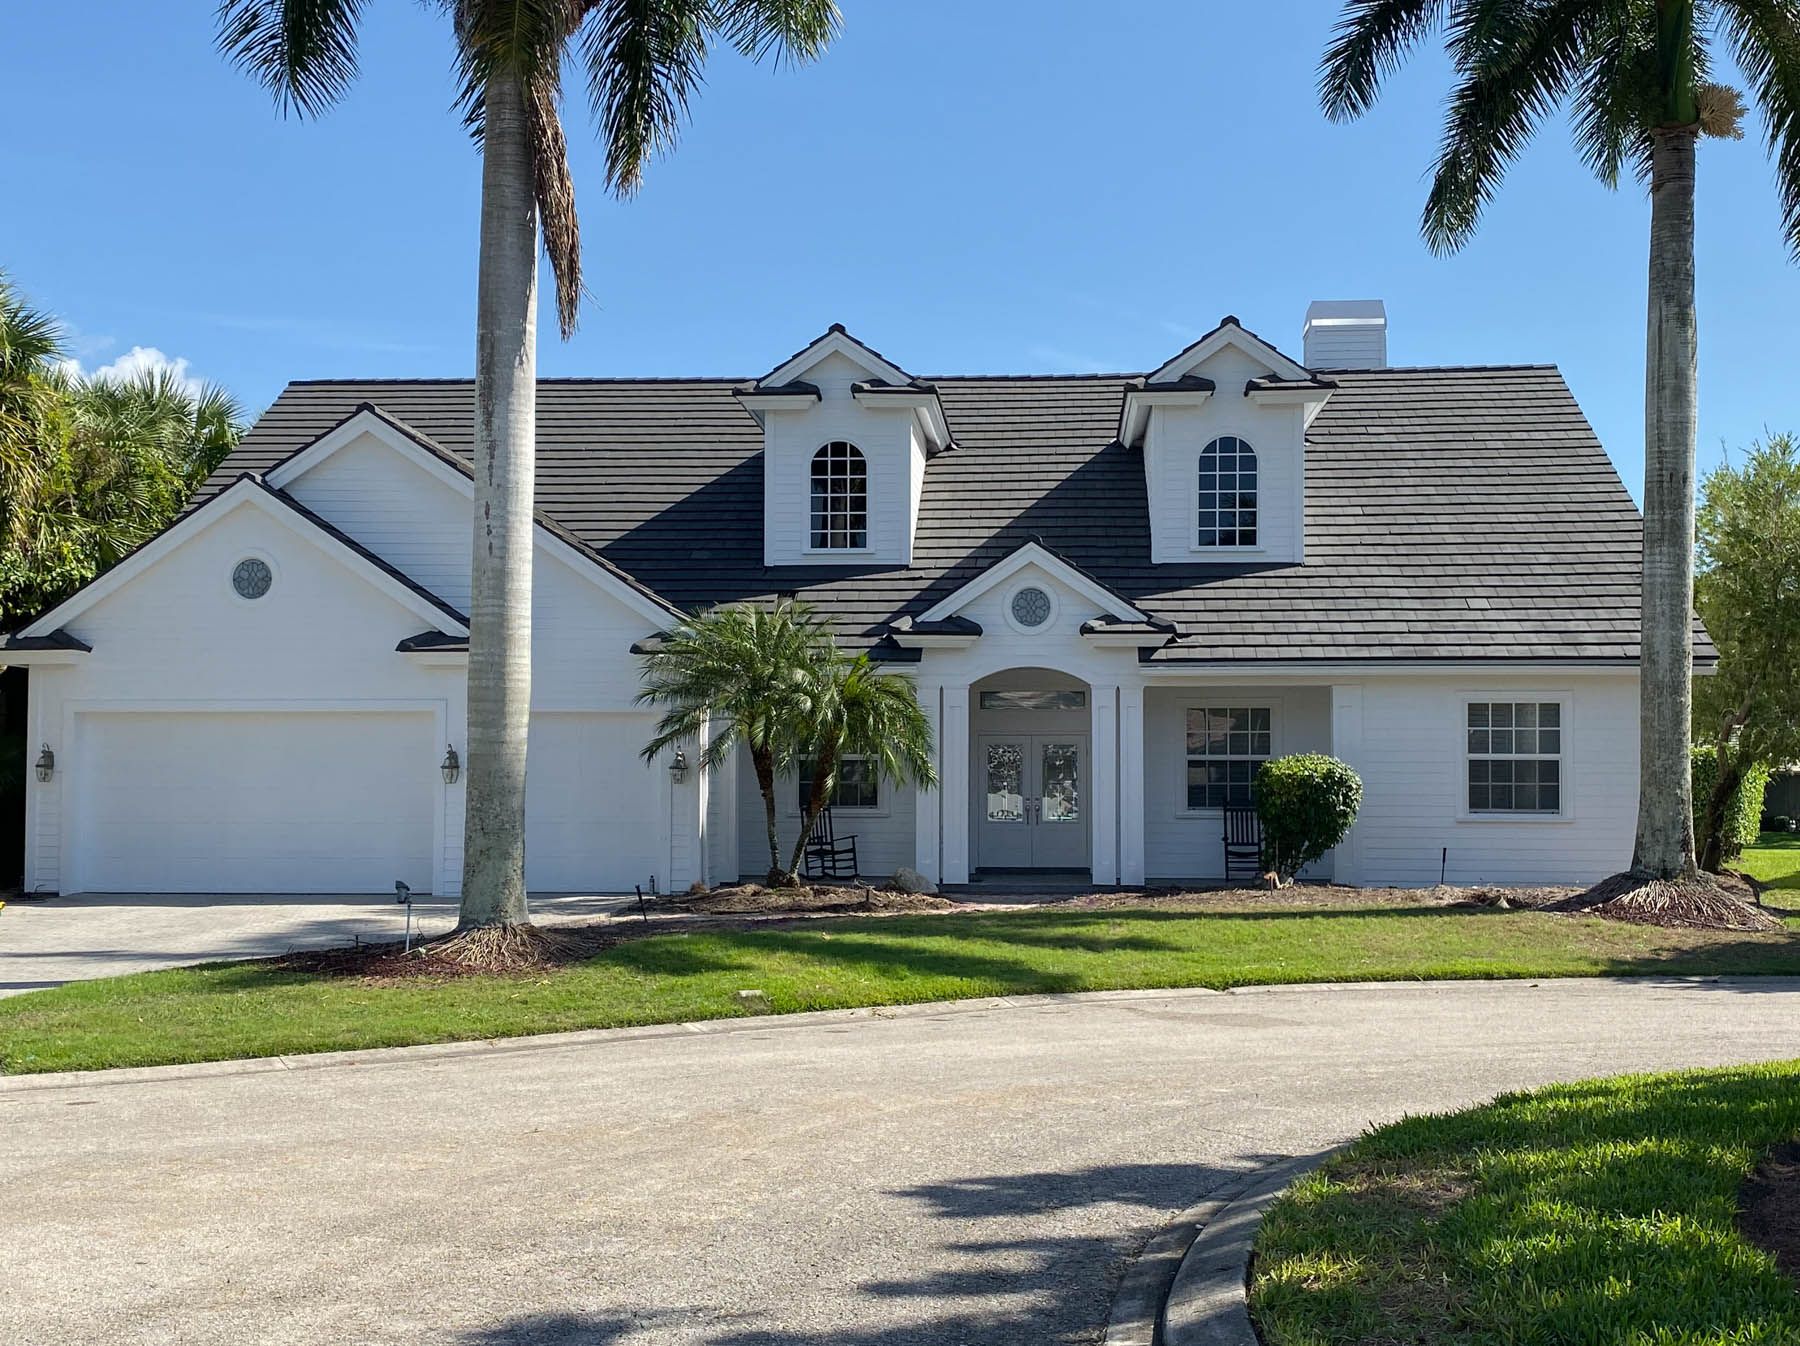 Exterior painting on cottage in Naples FL